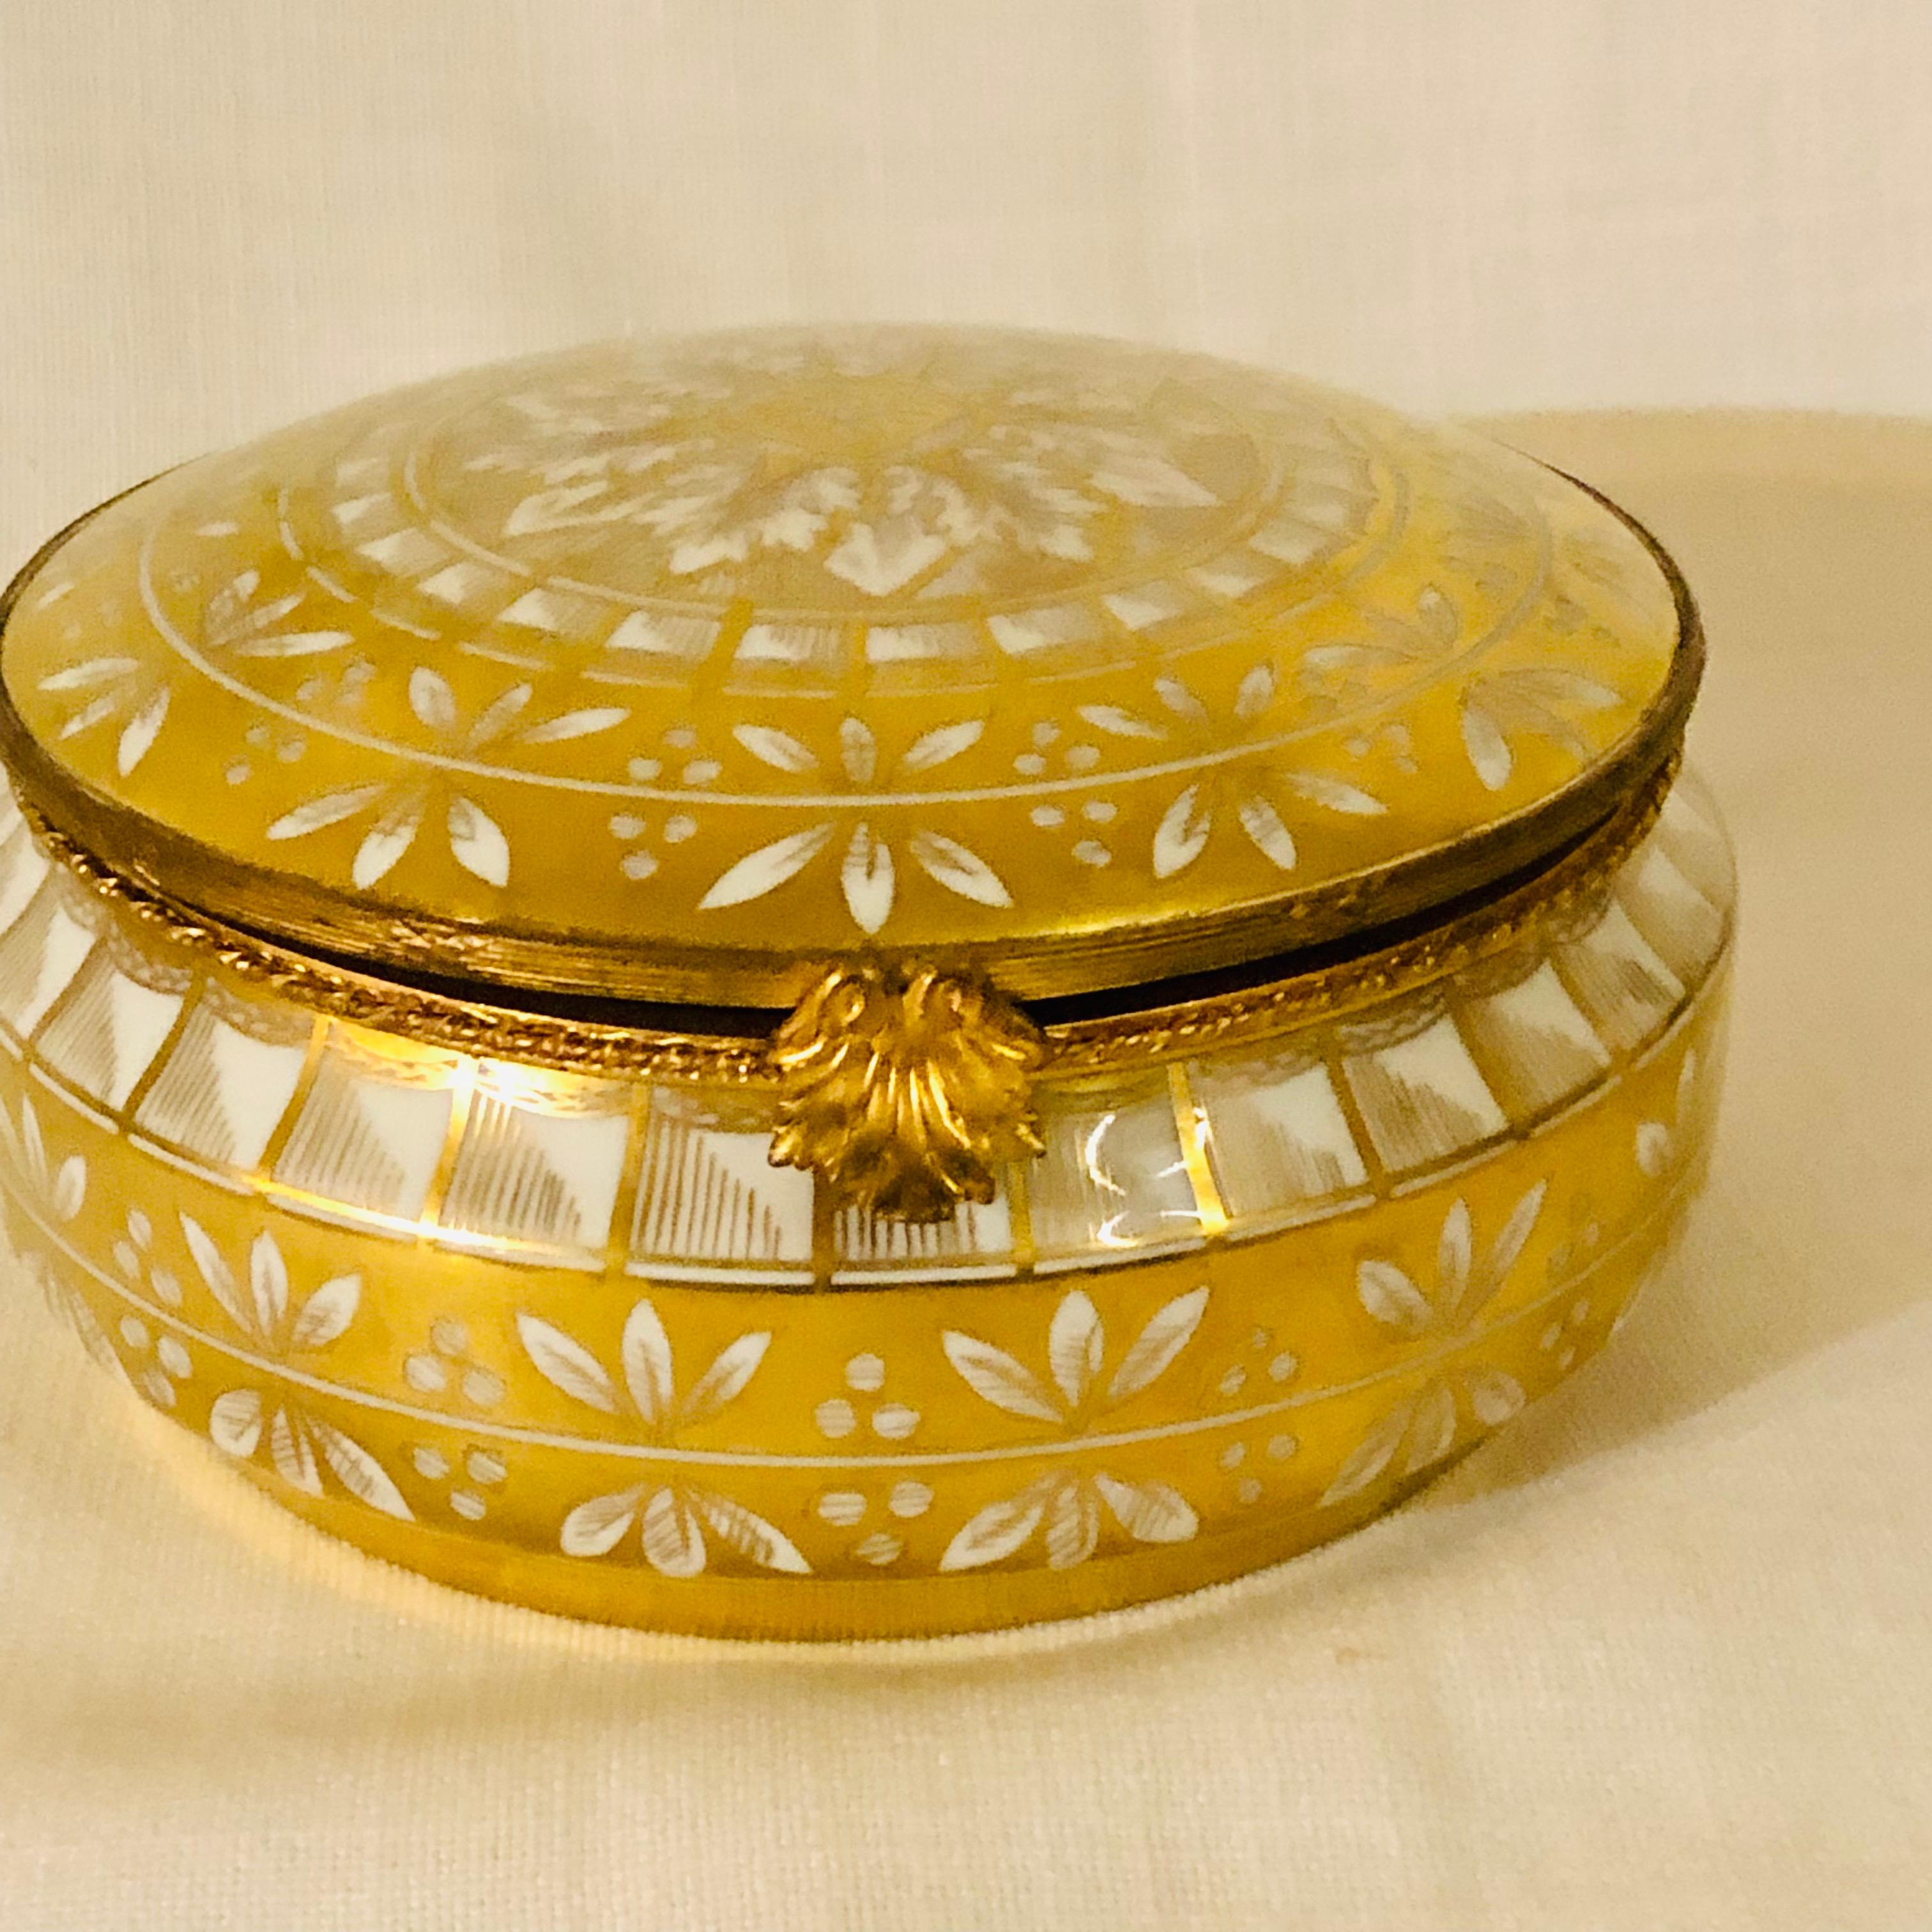 Le Tallec Porcelain Box with Gold Painted Decoration on a White Porcelain Ground 9